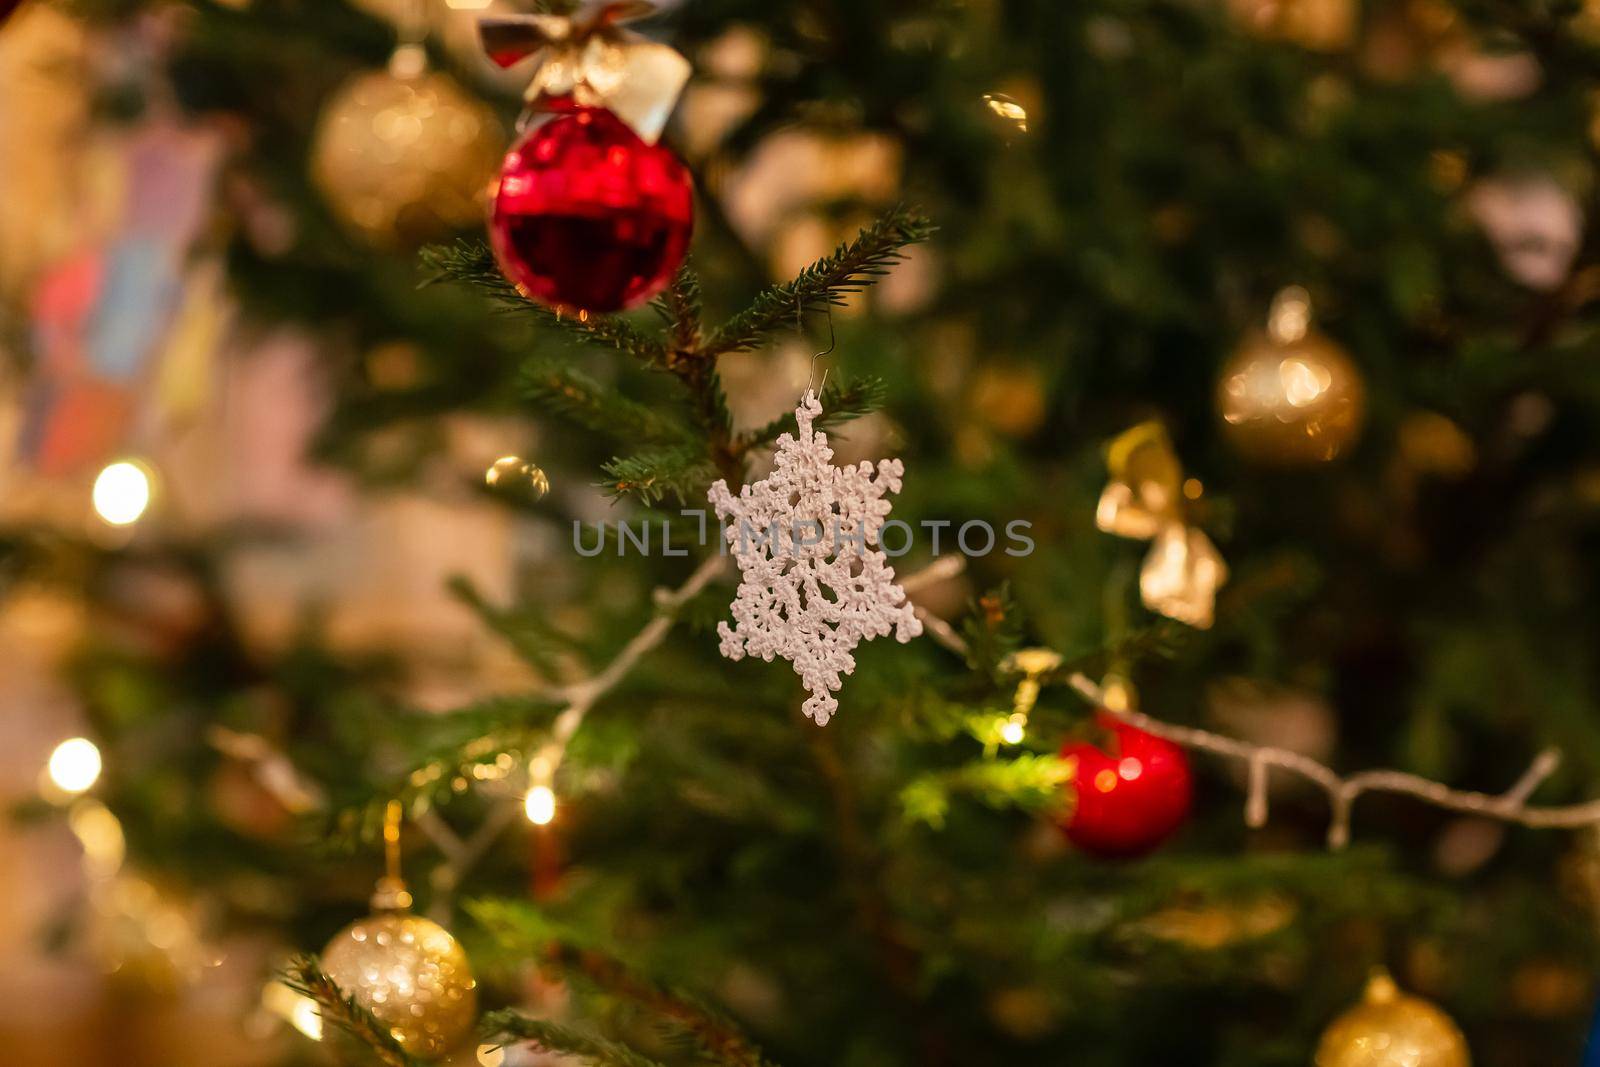 Decorated Christmas tree in Orthodox church on Christmas eve. Religious Christmas celebration concept